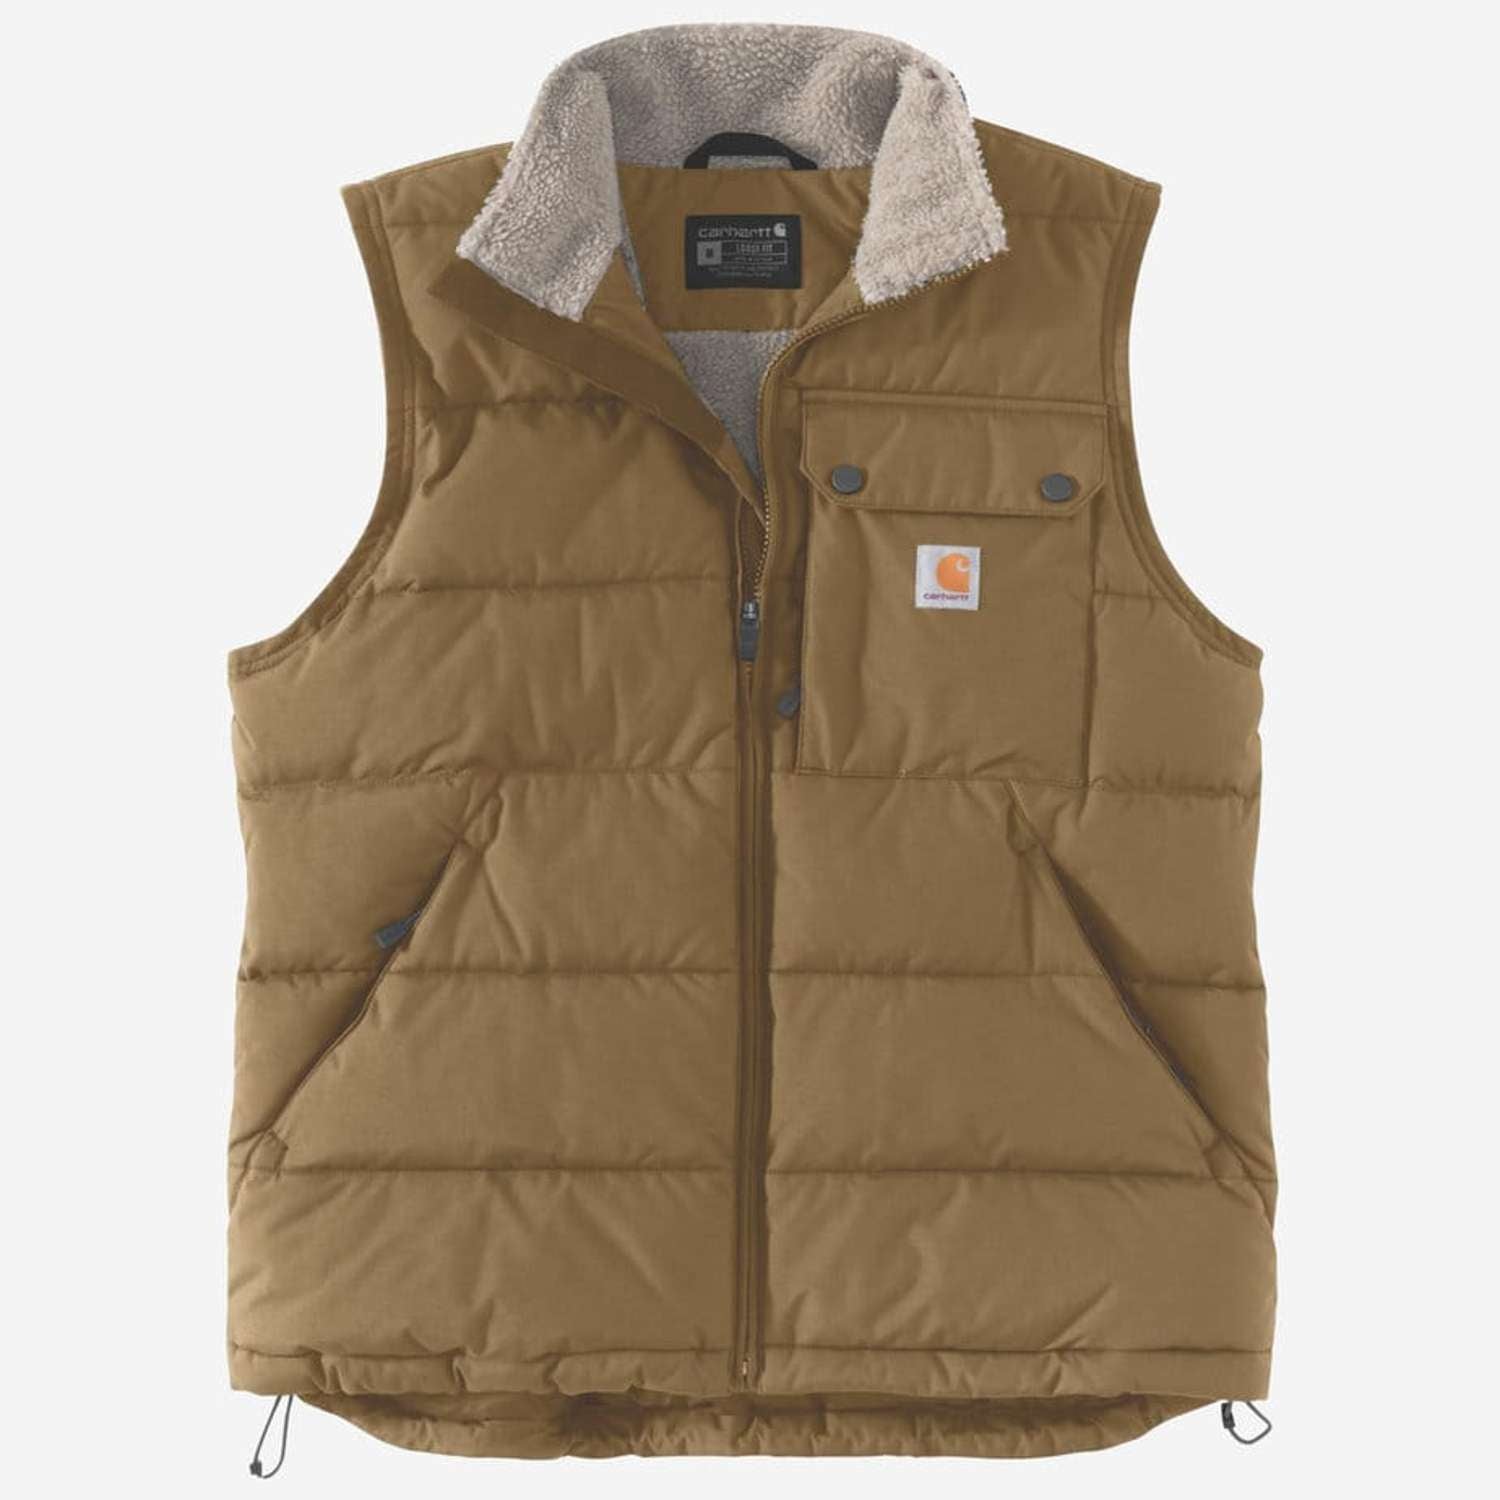 Se CARHARTT Loose Fit Midweight Insulated Vest OAK BROWN - L hos Toolster.dk